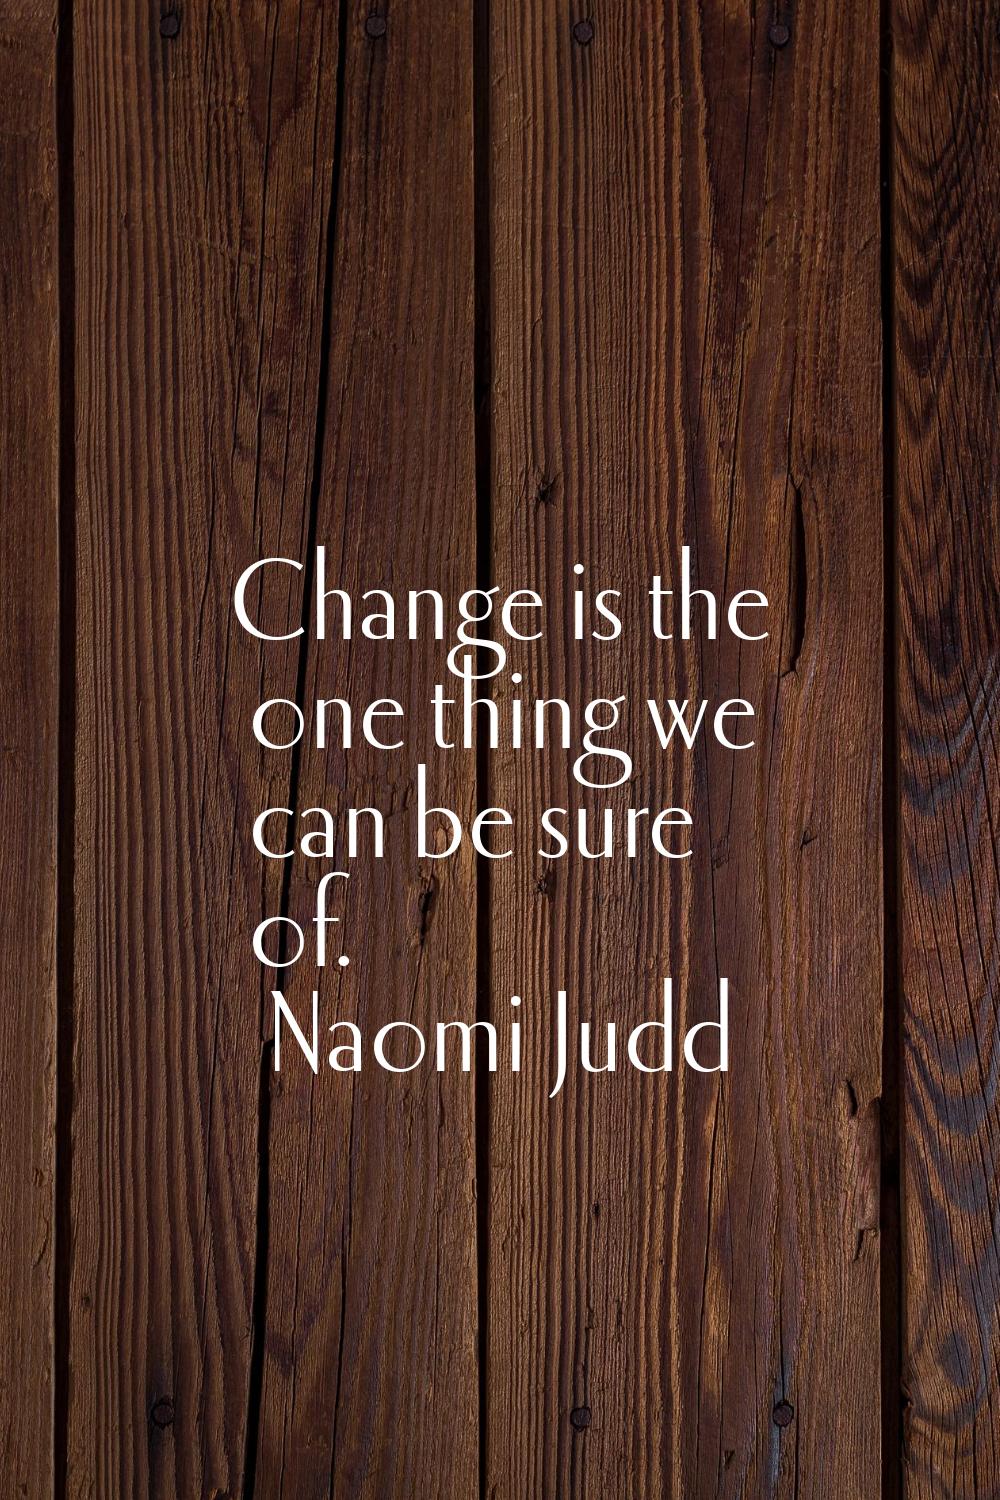 Change is the one thing we can be sure of.